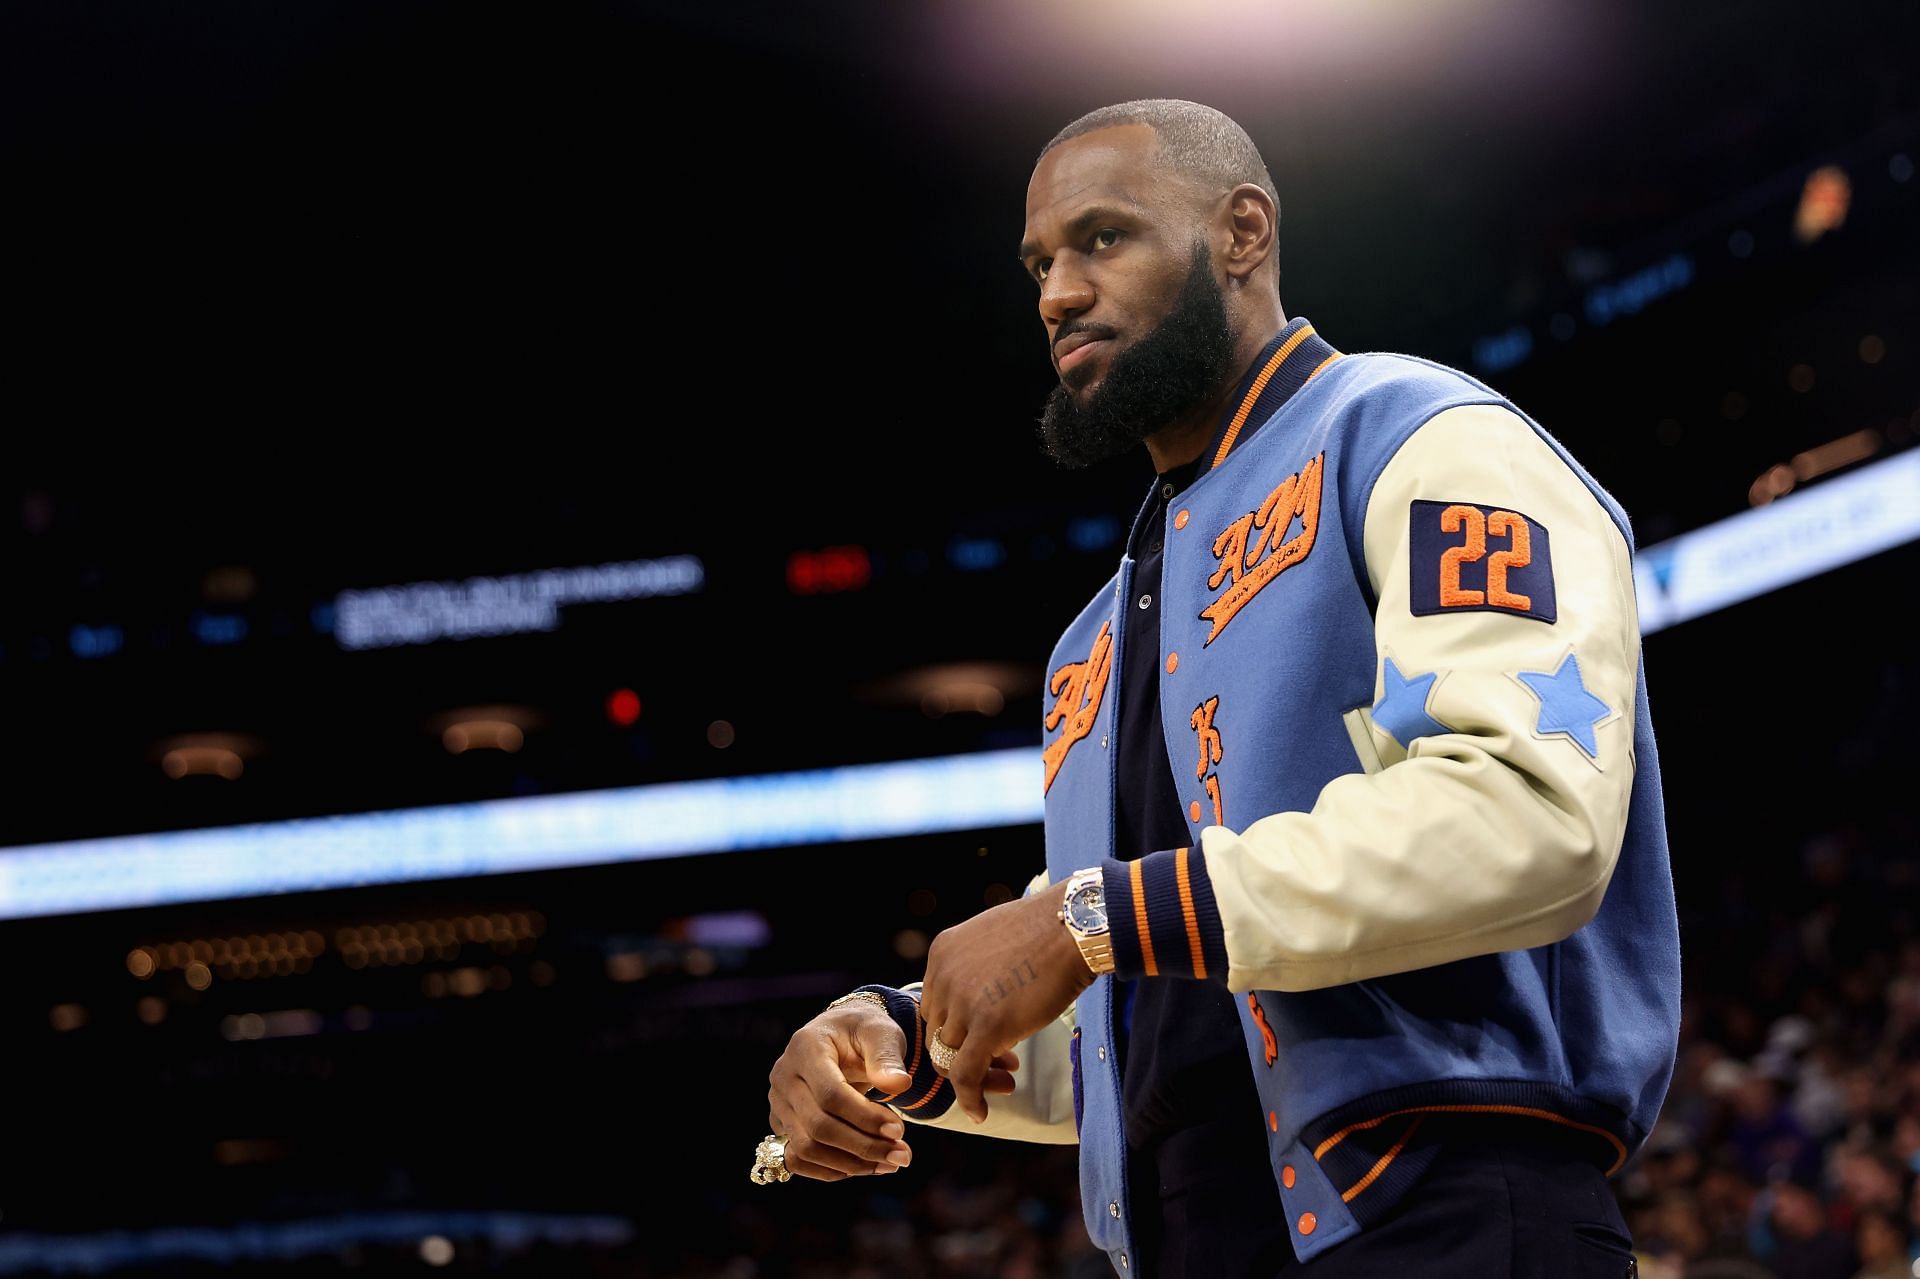 LeBron James won't wear social justice message on Lakers jersey - Boston  News, Weather, Sports